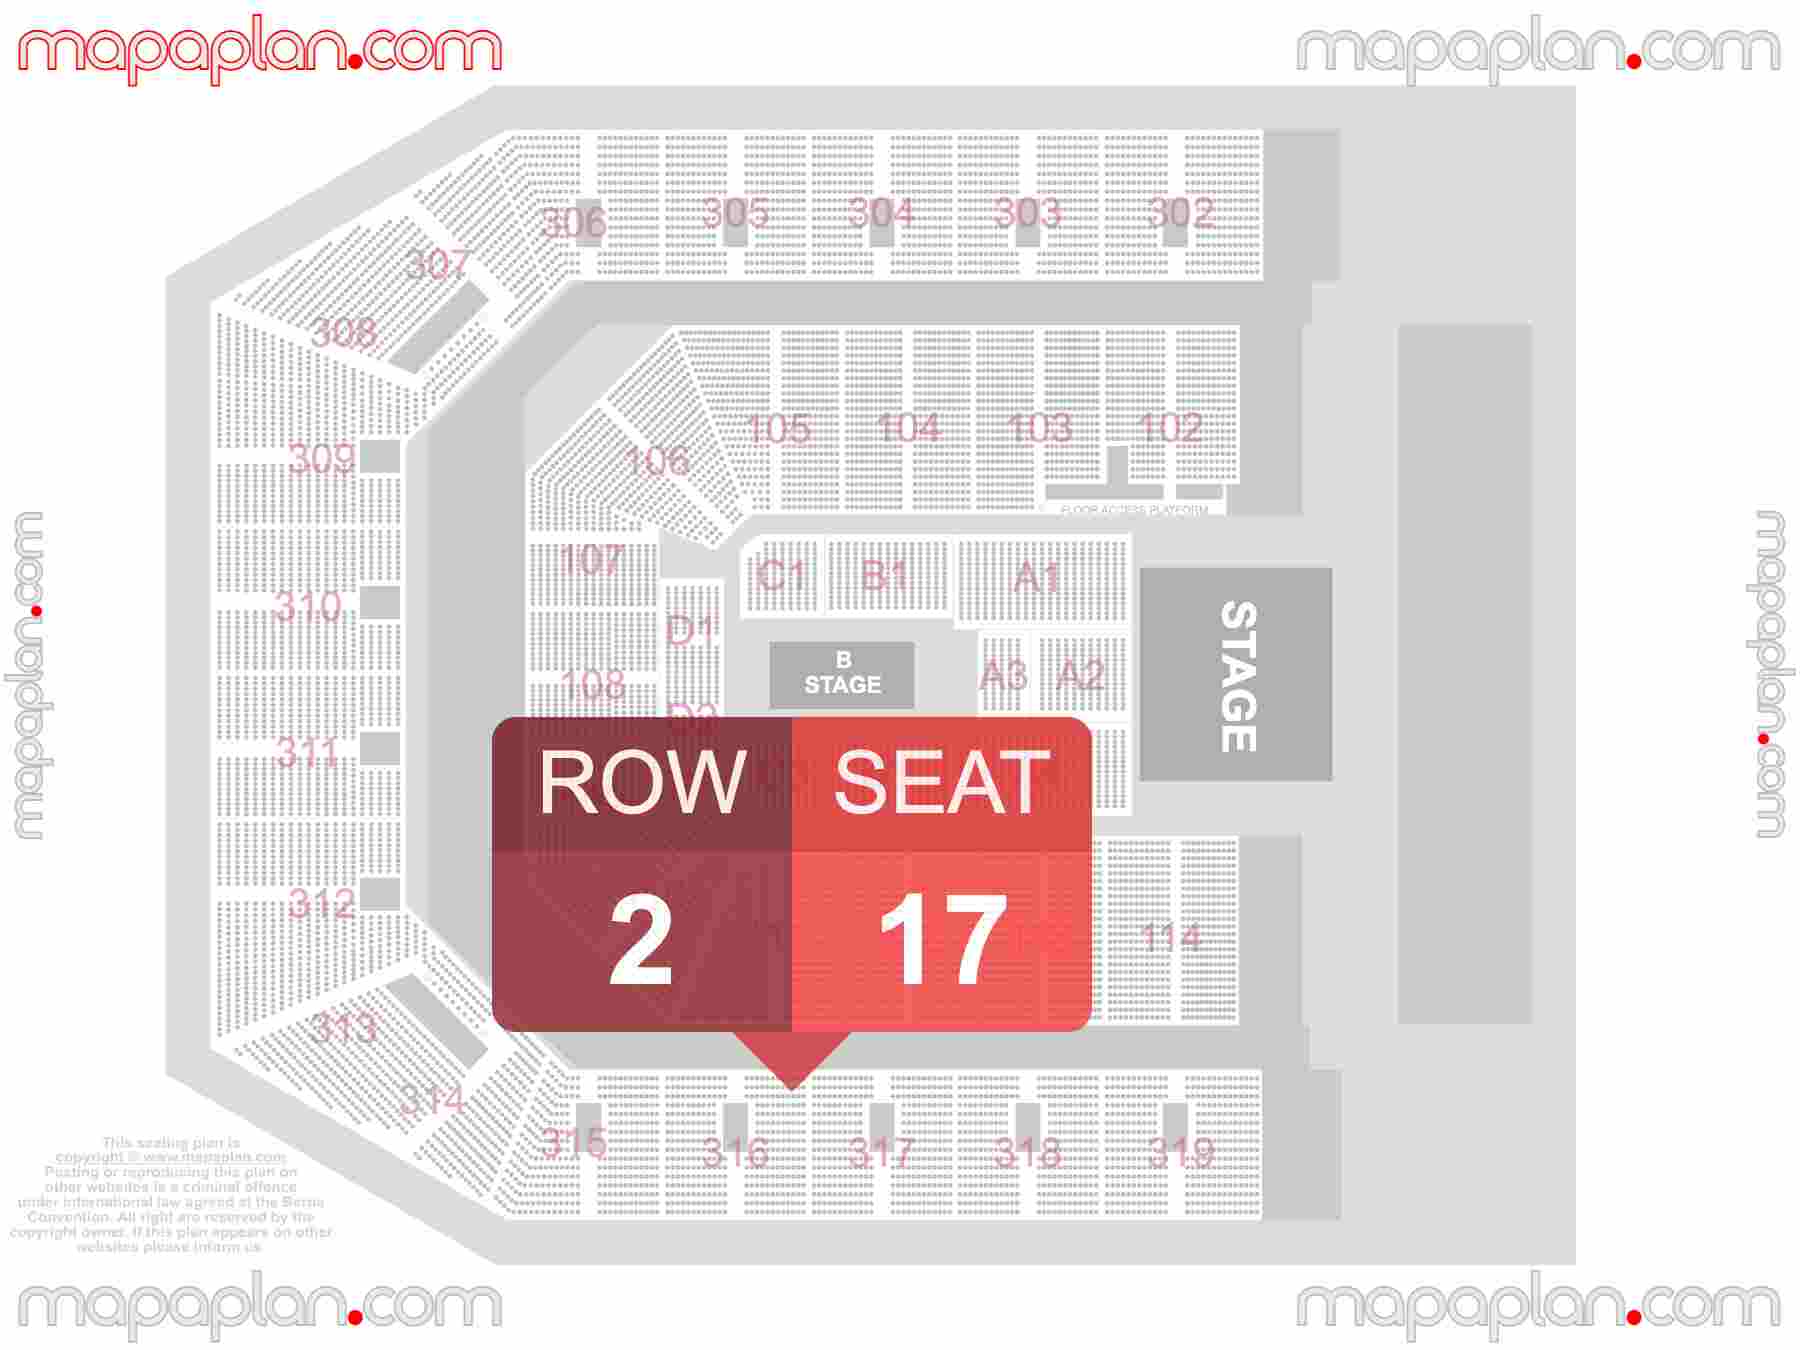 Manchester Co-op Live seating plan Concert with B-stage find best seats row numbering system chart showing how many seats per row - Individual 'find my seat' virtual locator